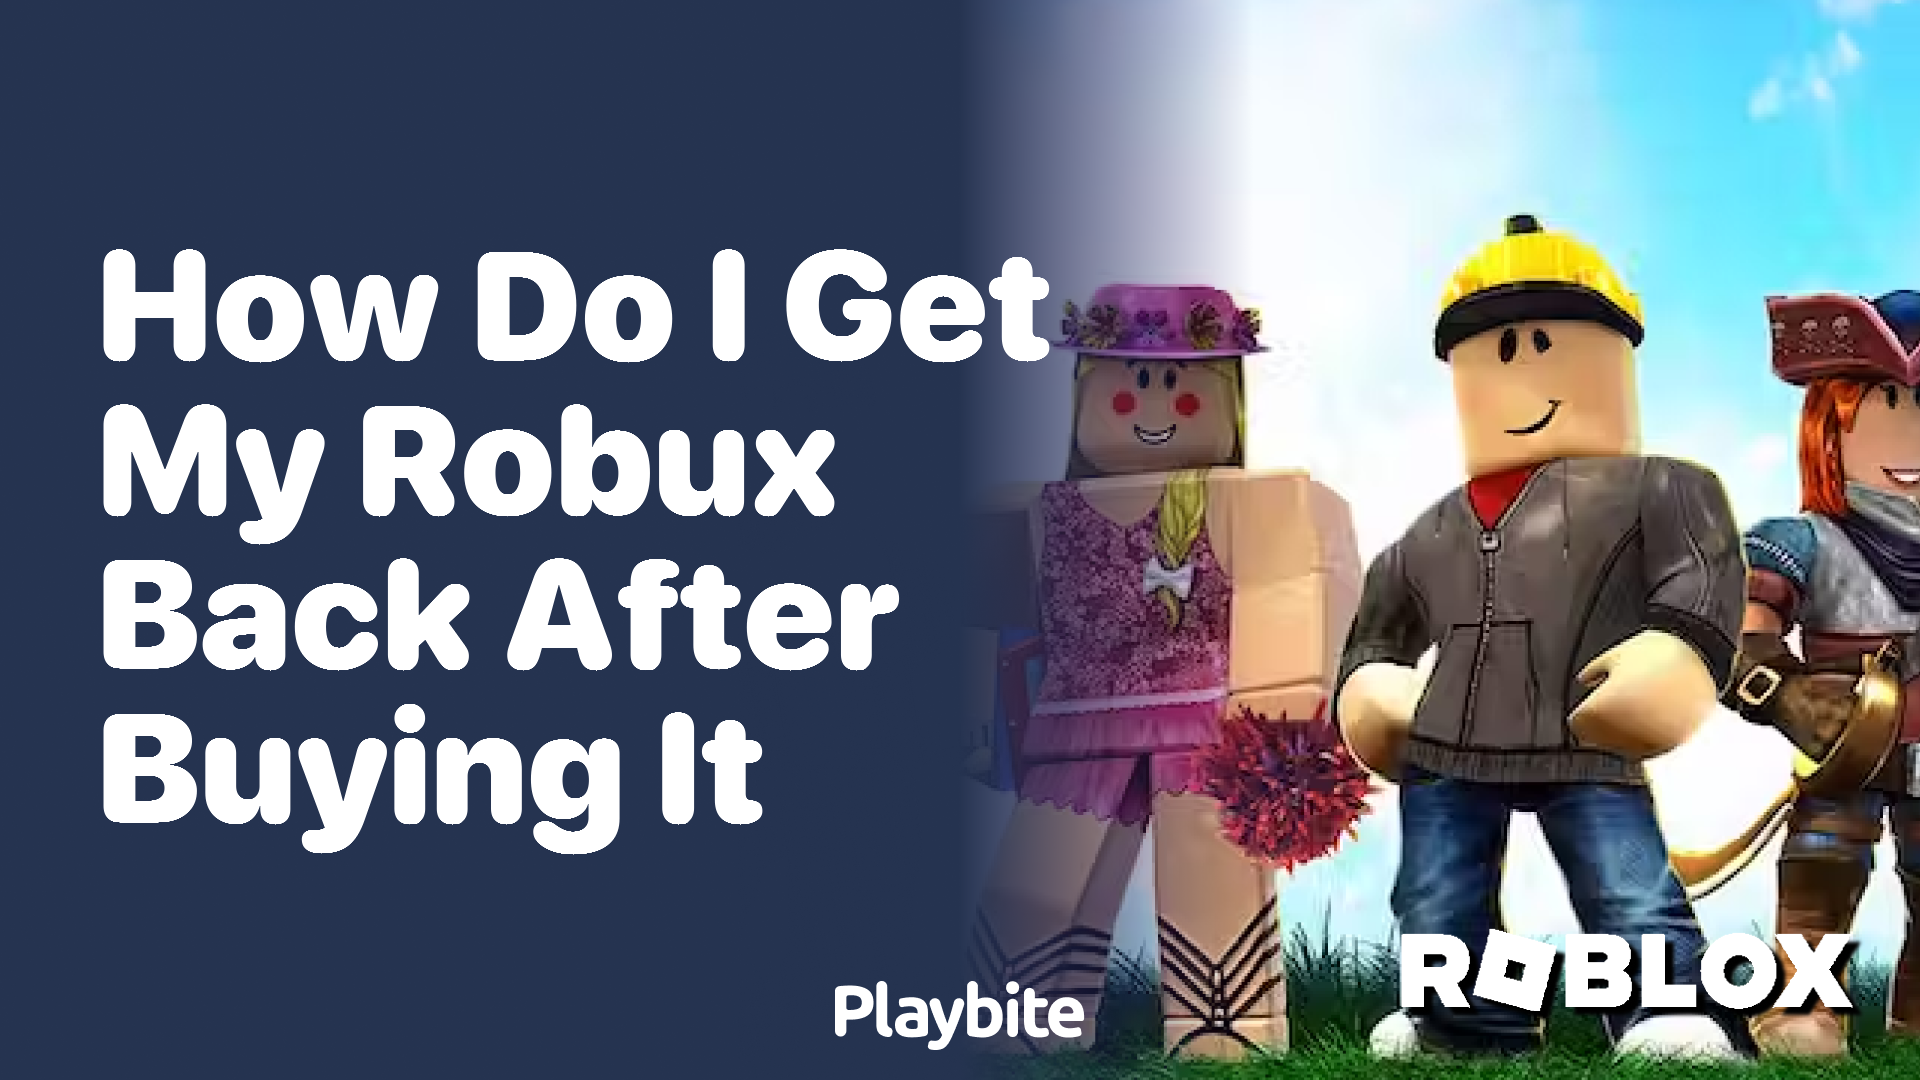 How Do I Get My Robux Back After Buying It?